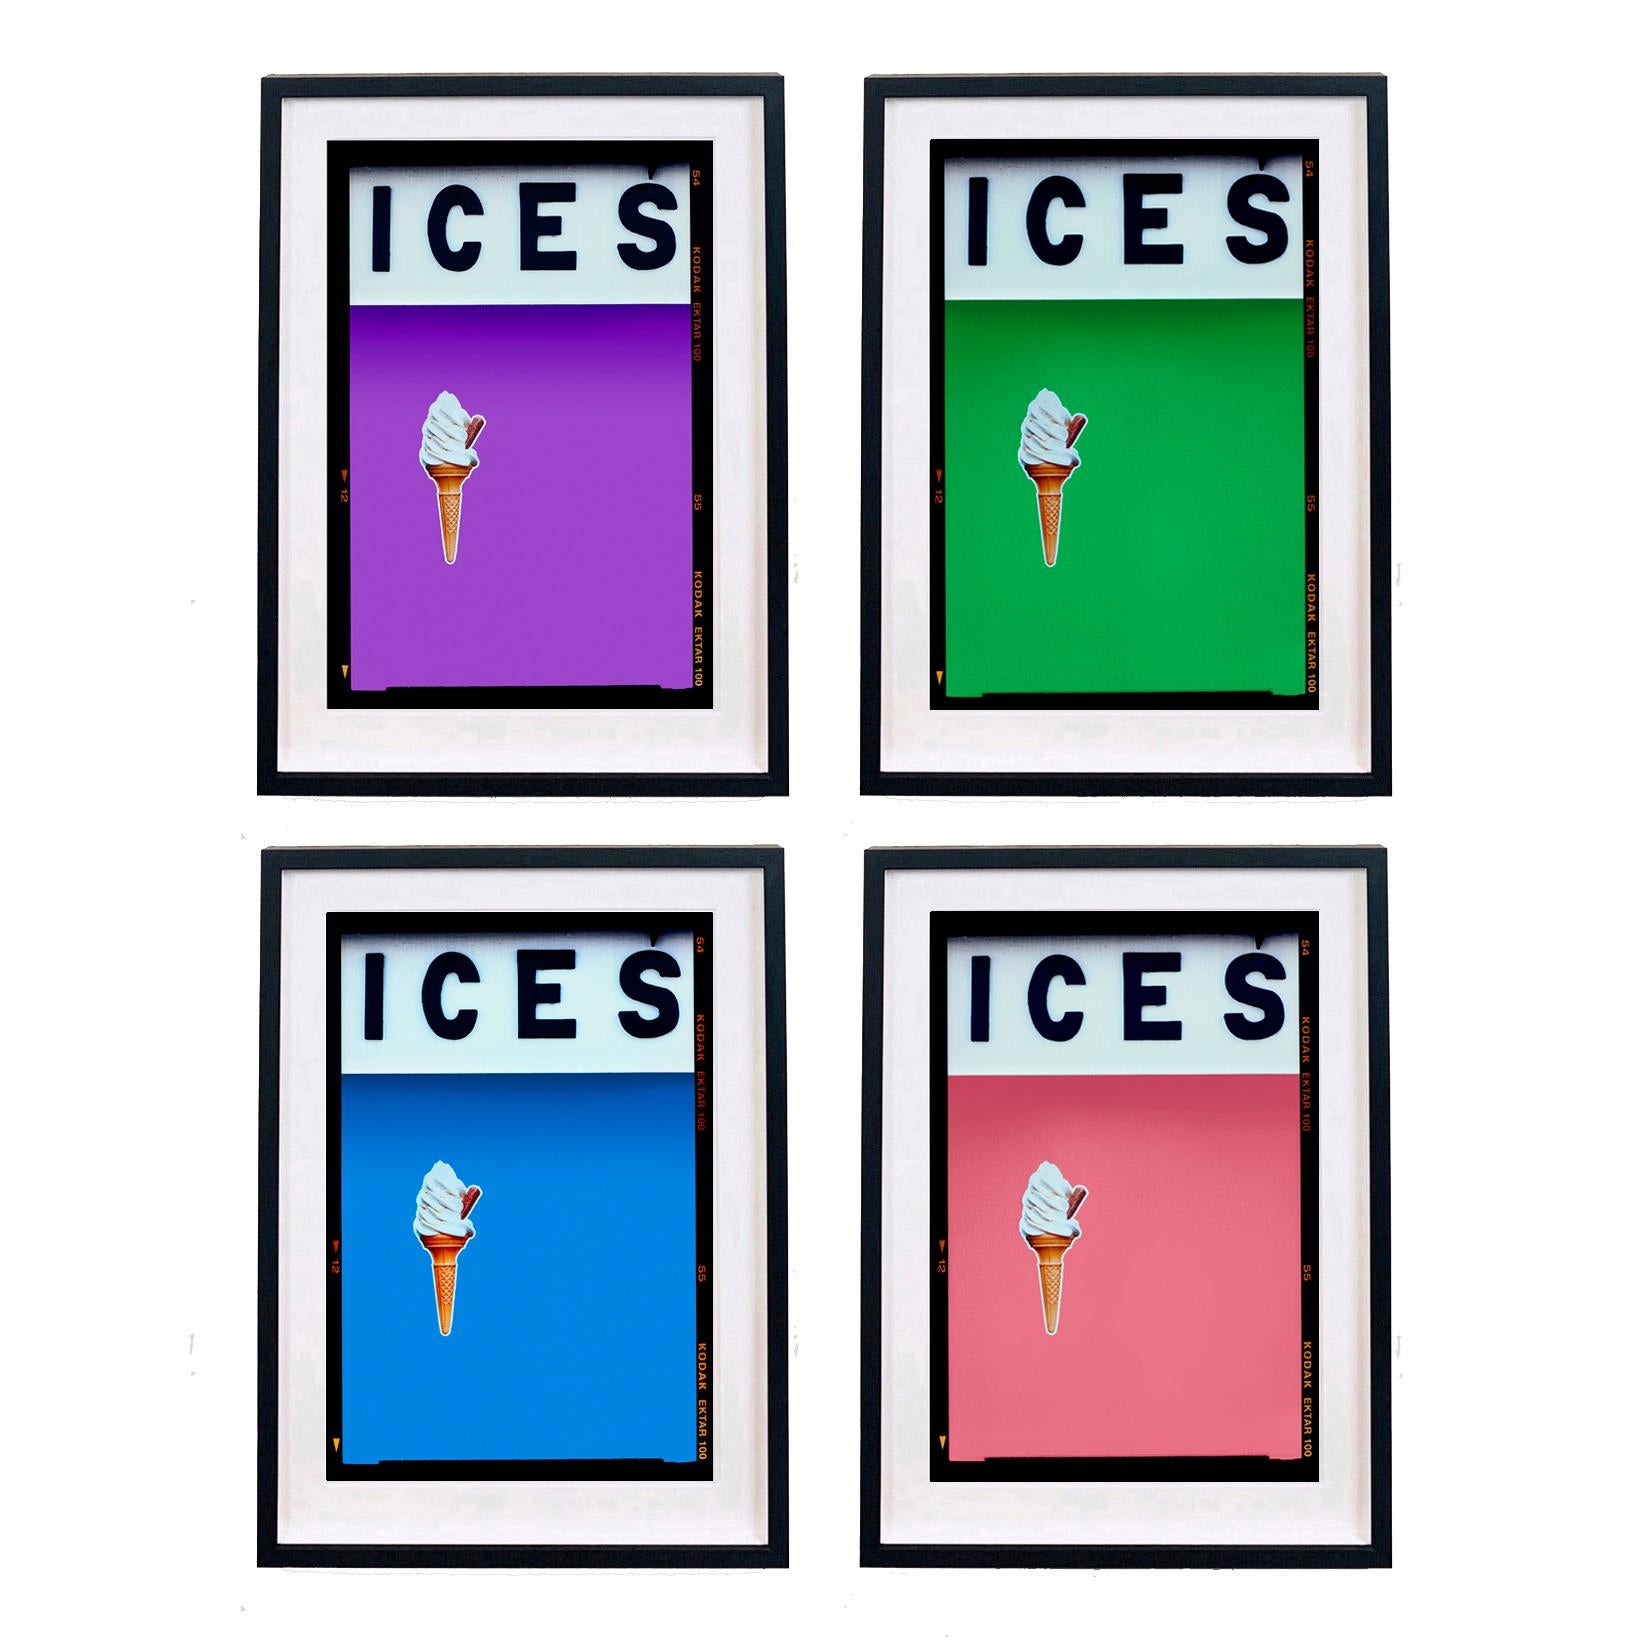 Ices (Green), Bexhill-on-Sea - British seaside color photography For Sale 3